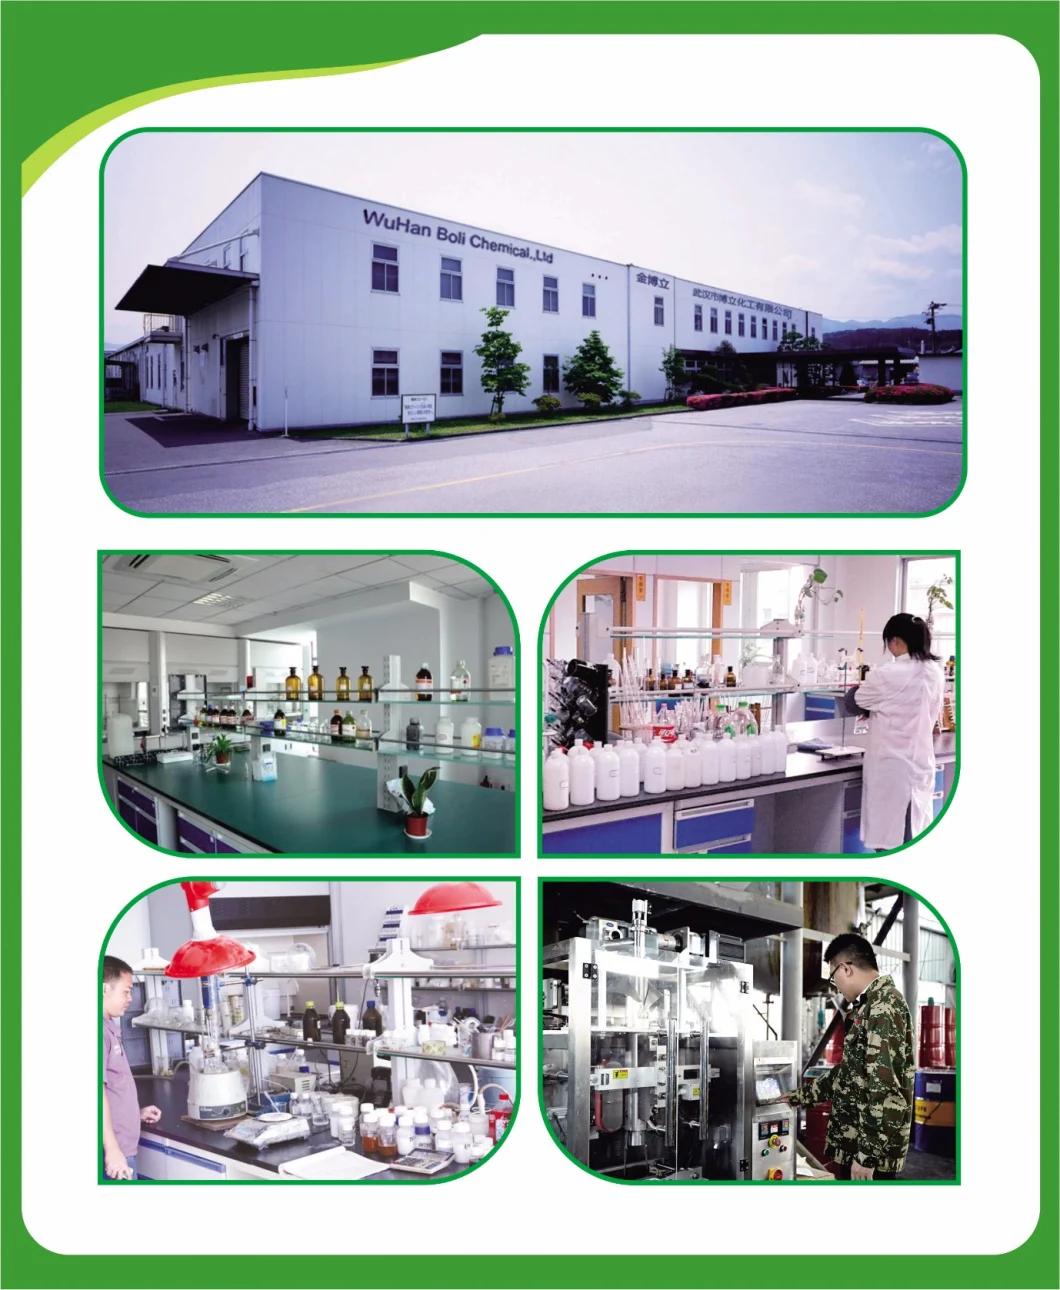 China Factory Spray Adhesive Glue for Foam, Sponge, Thermal Insulation, Sound Insulation